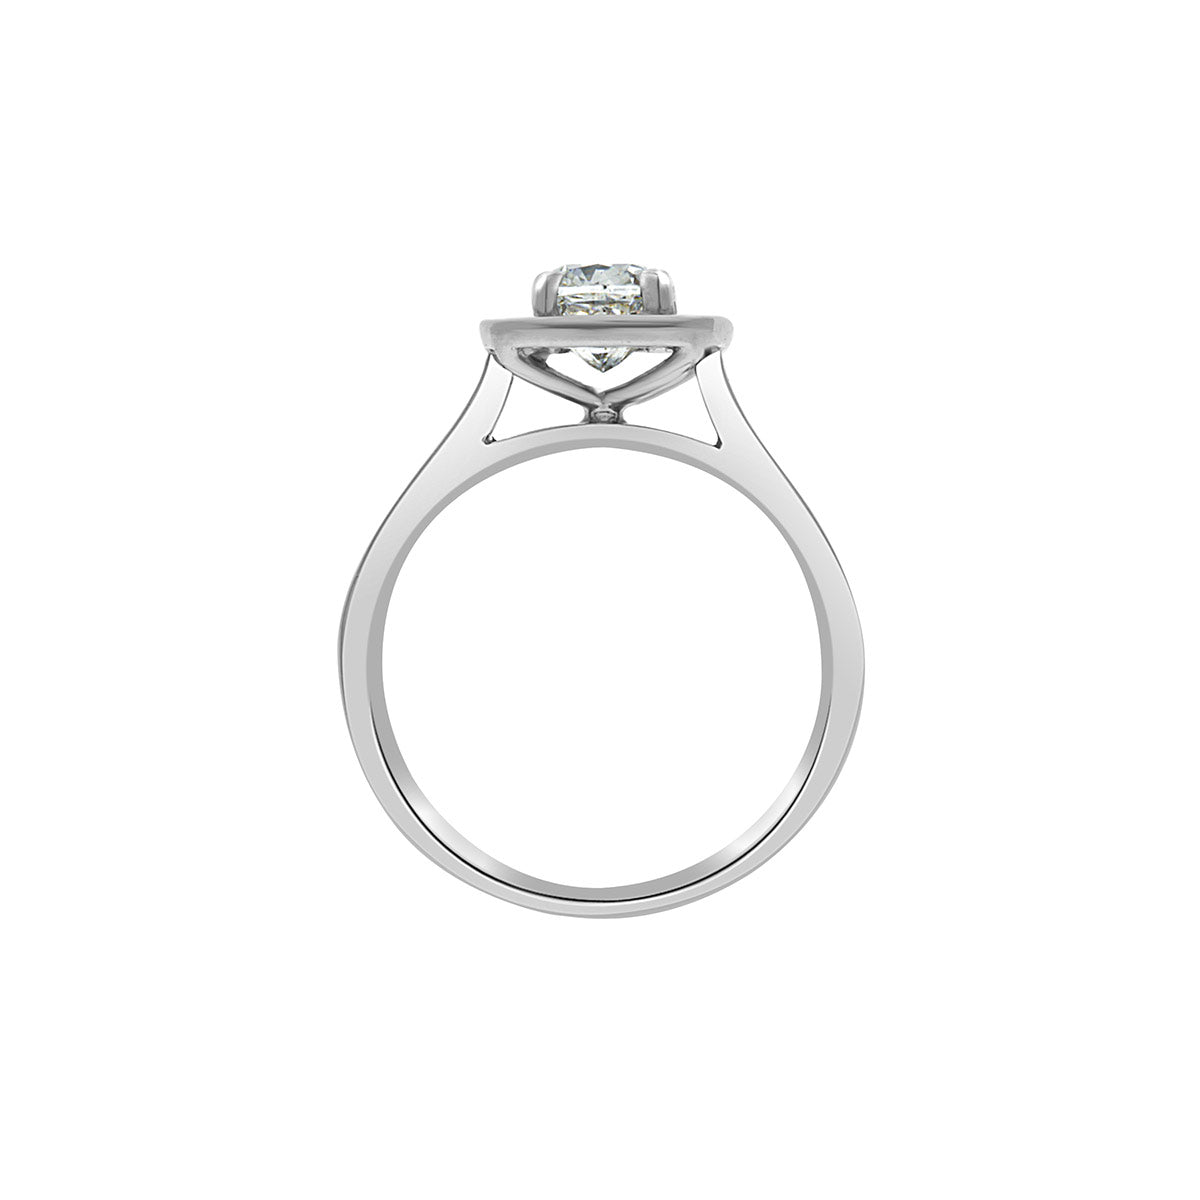 Cushion Cut Diamond Ring in white gold in a vertical position